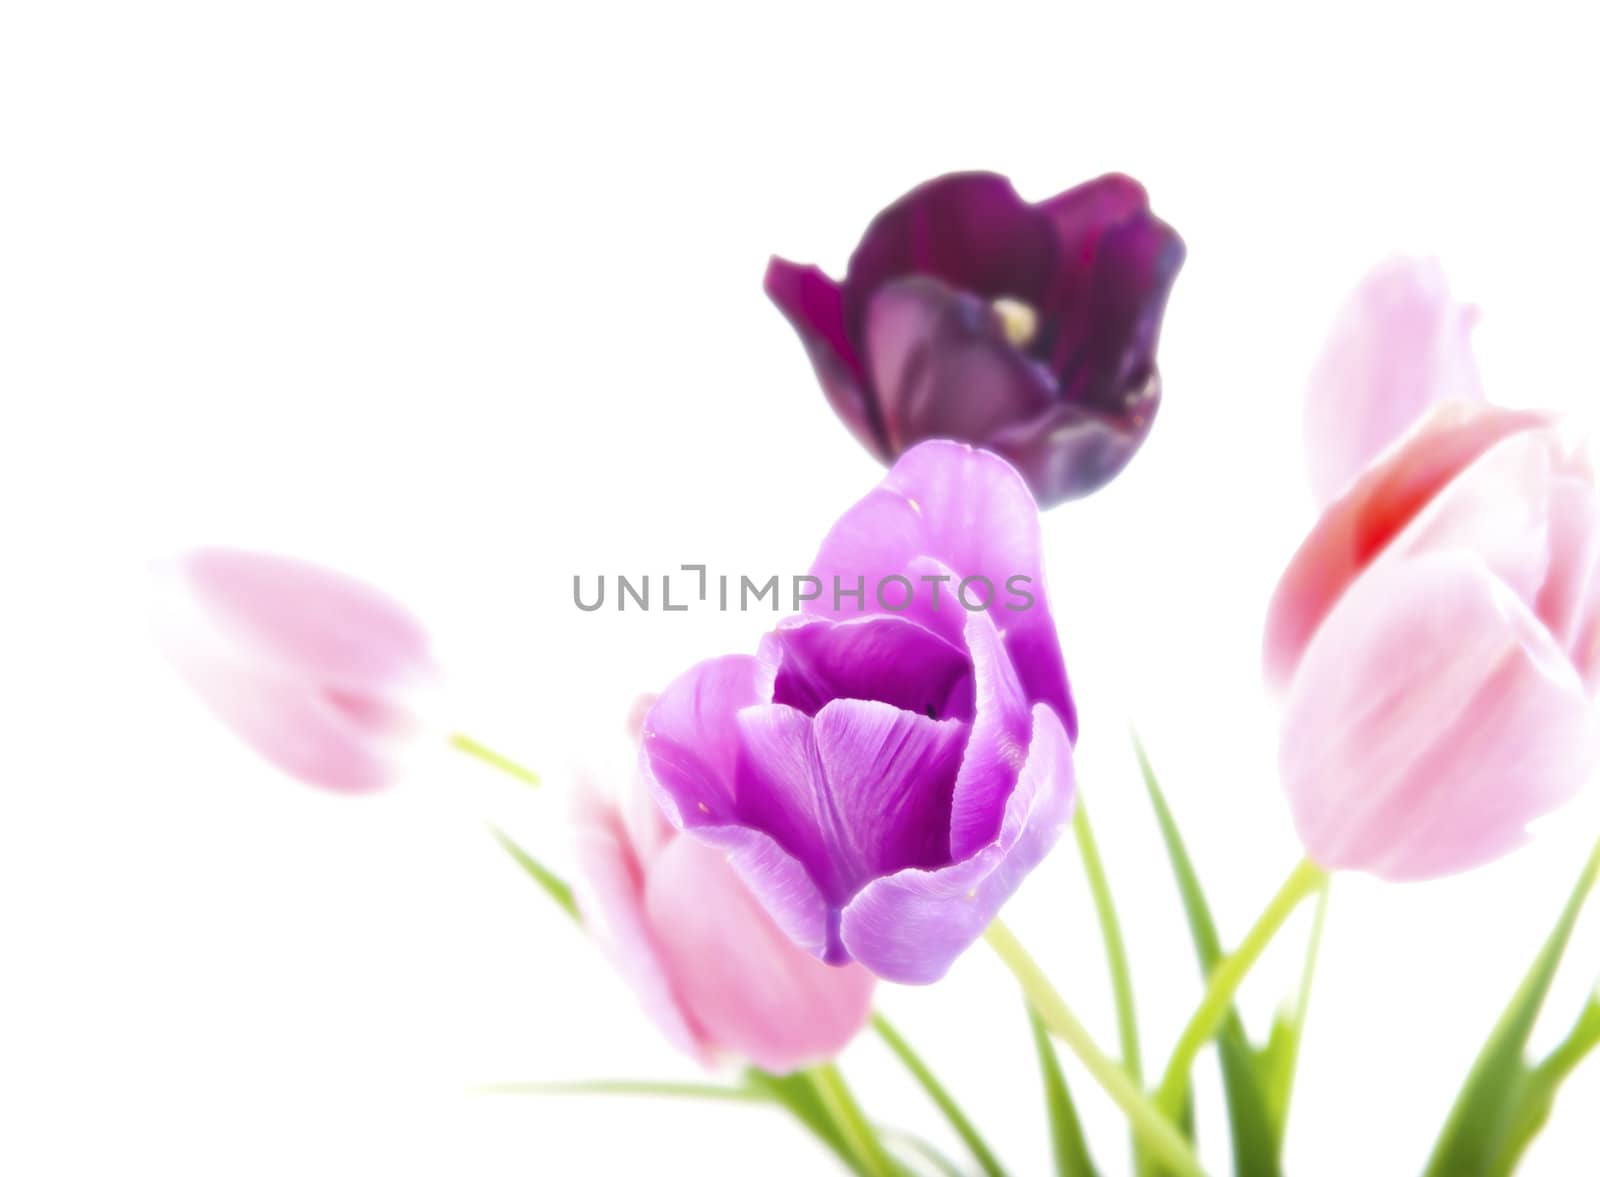 Bunch of beautiful spring flowers - colorful tulips against white background with shallow DOF and ultrasoft light